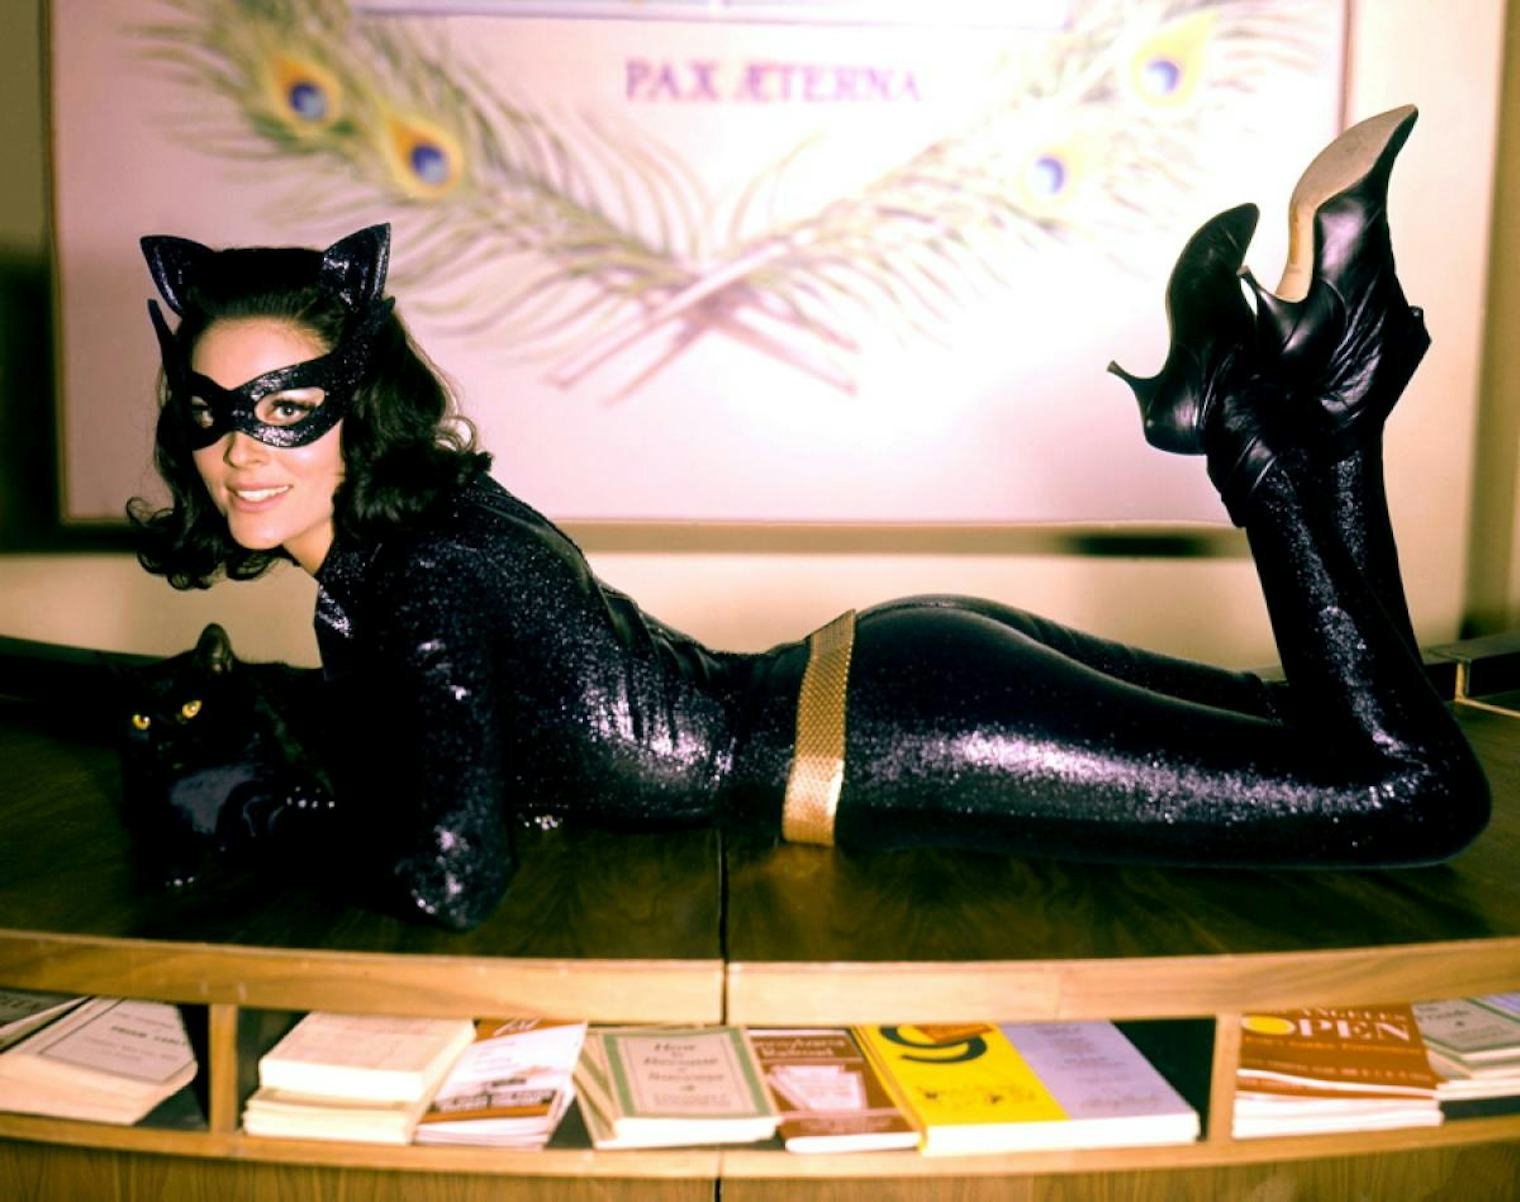 Catwoman S Style Evolution From The 1960s To 2015 And From Practical To Sexuality Kgsau